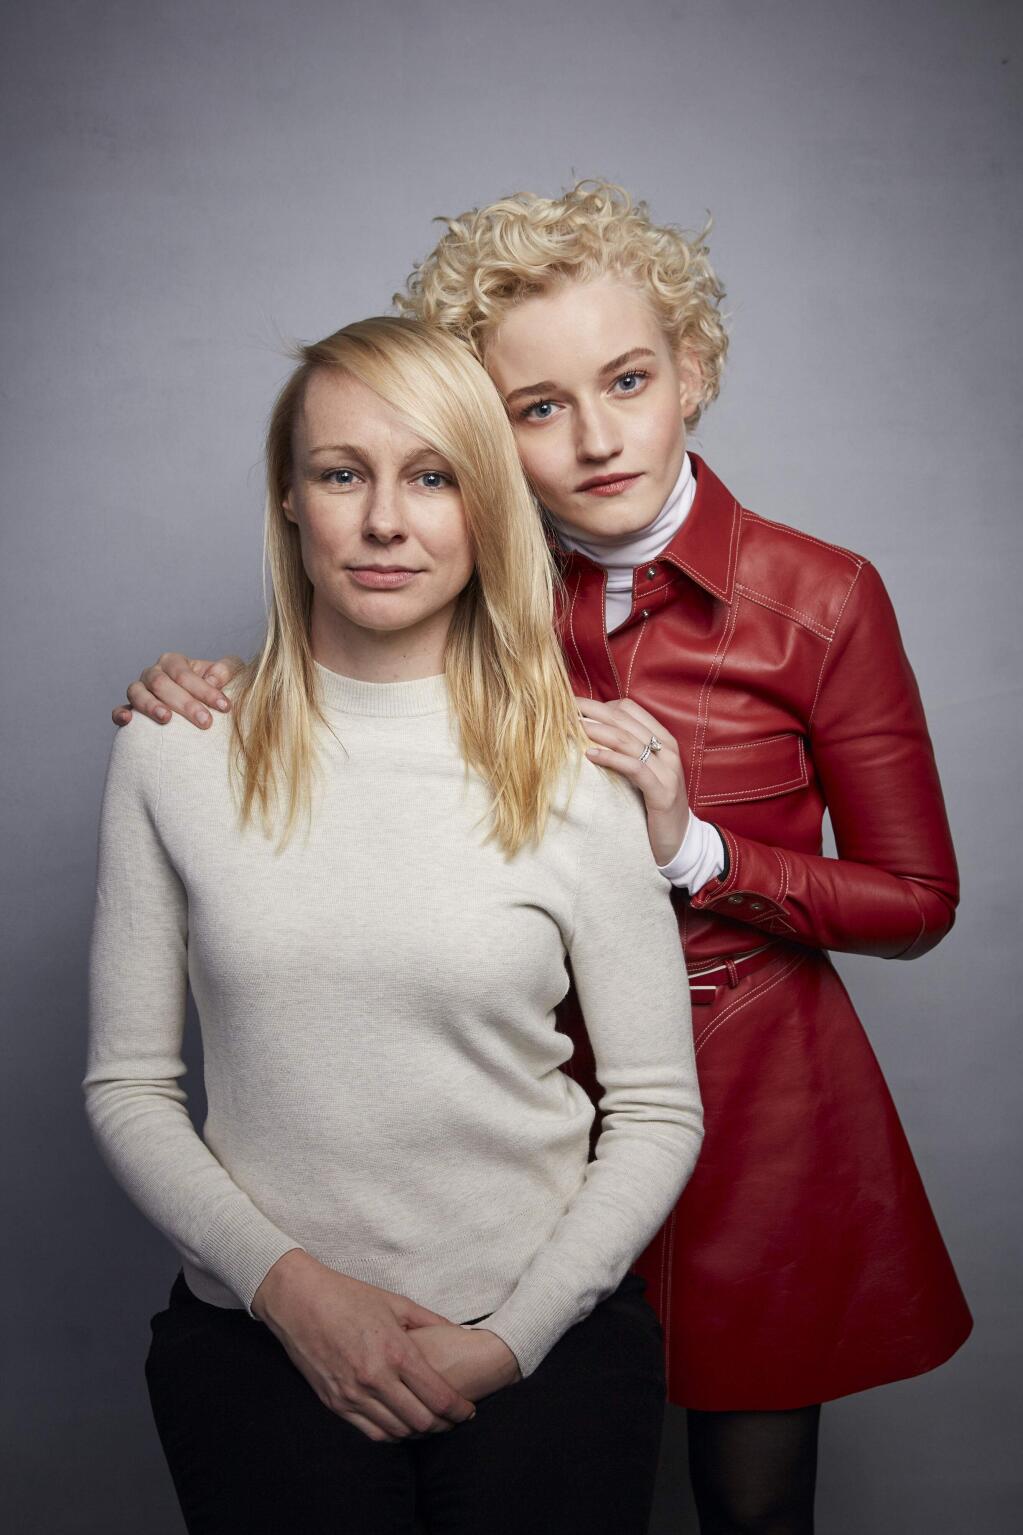 Writer/director Kitty Green, left, and Julia Garner pose for a portrait to promote the film 'The Assistant' at the Music Lodge during the Sundance Film Festival on Sunday, Jan. 26, 2020, in Park City, Utah. (Photo by Taylor Jewell/Invision/AP)